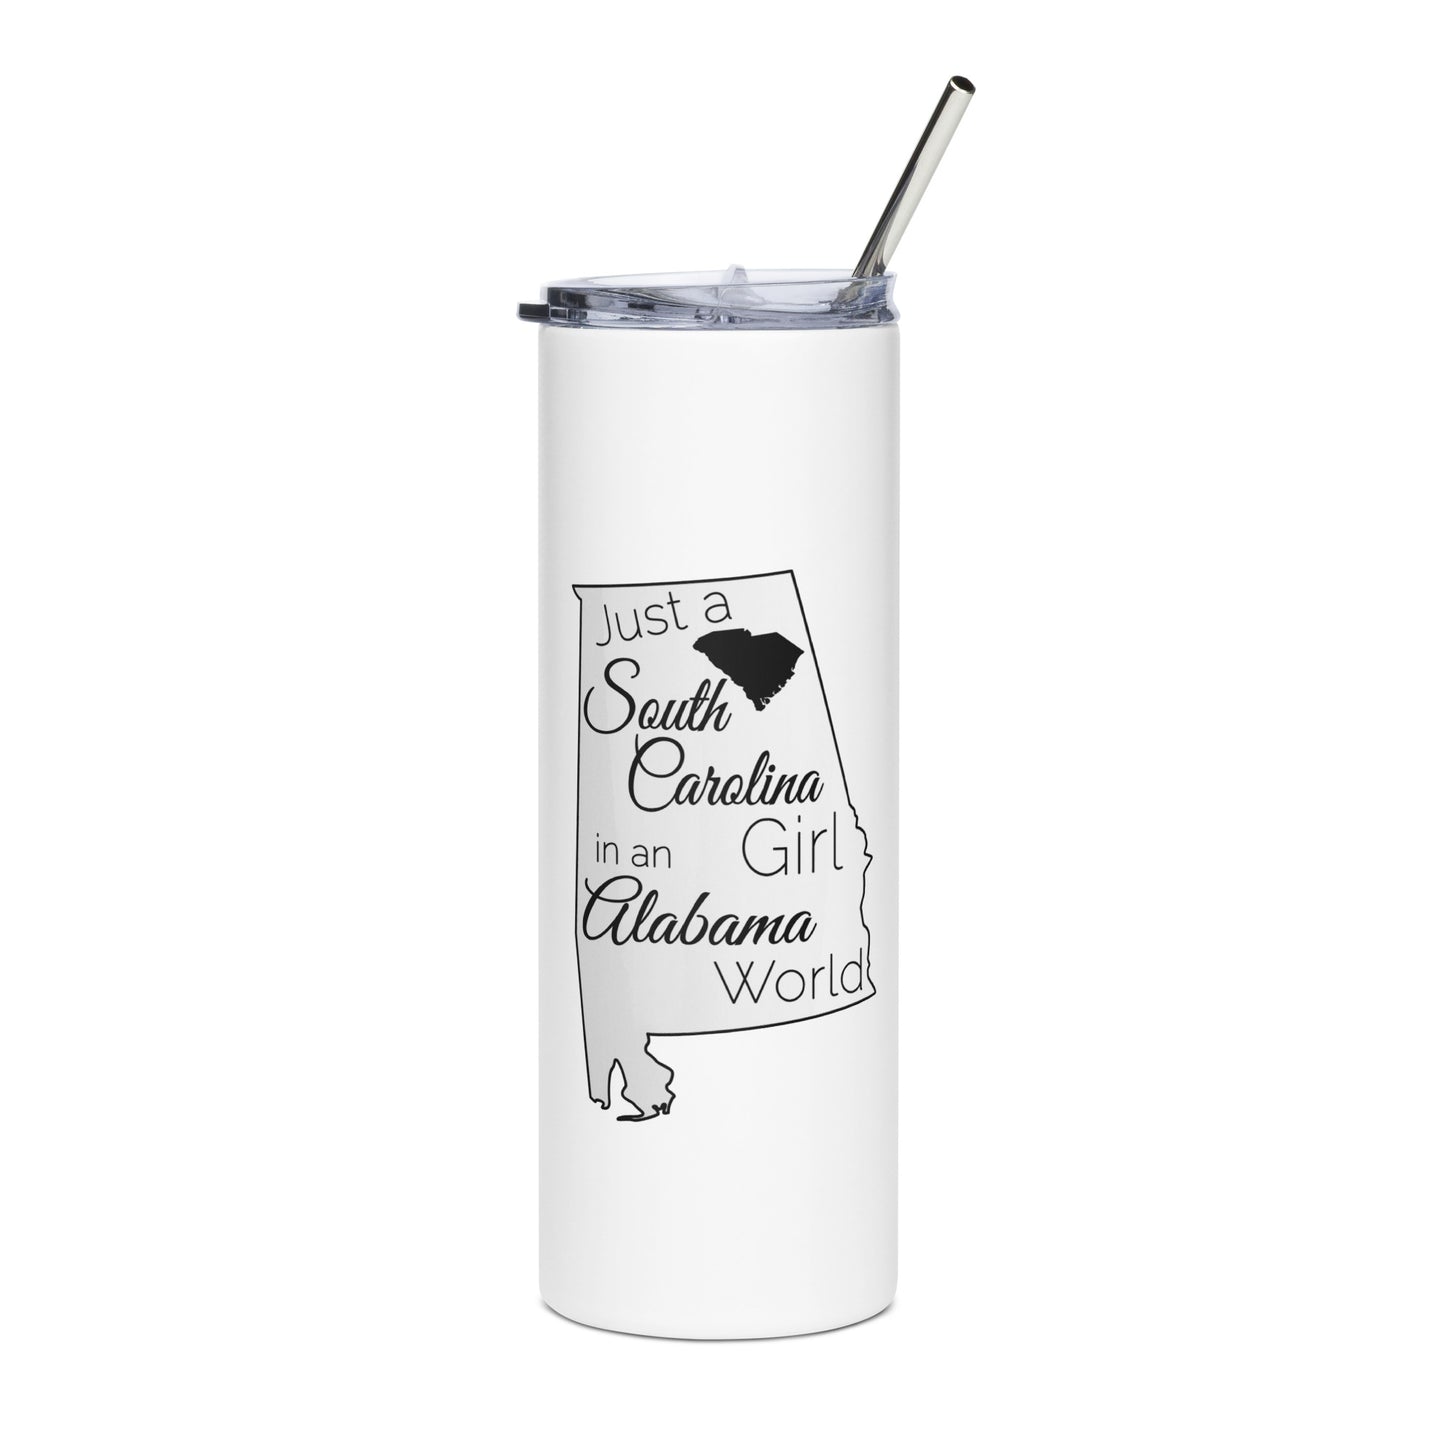 Just a South Carolina Girl in an Alabama World Stainless steel tumbler